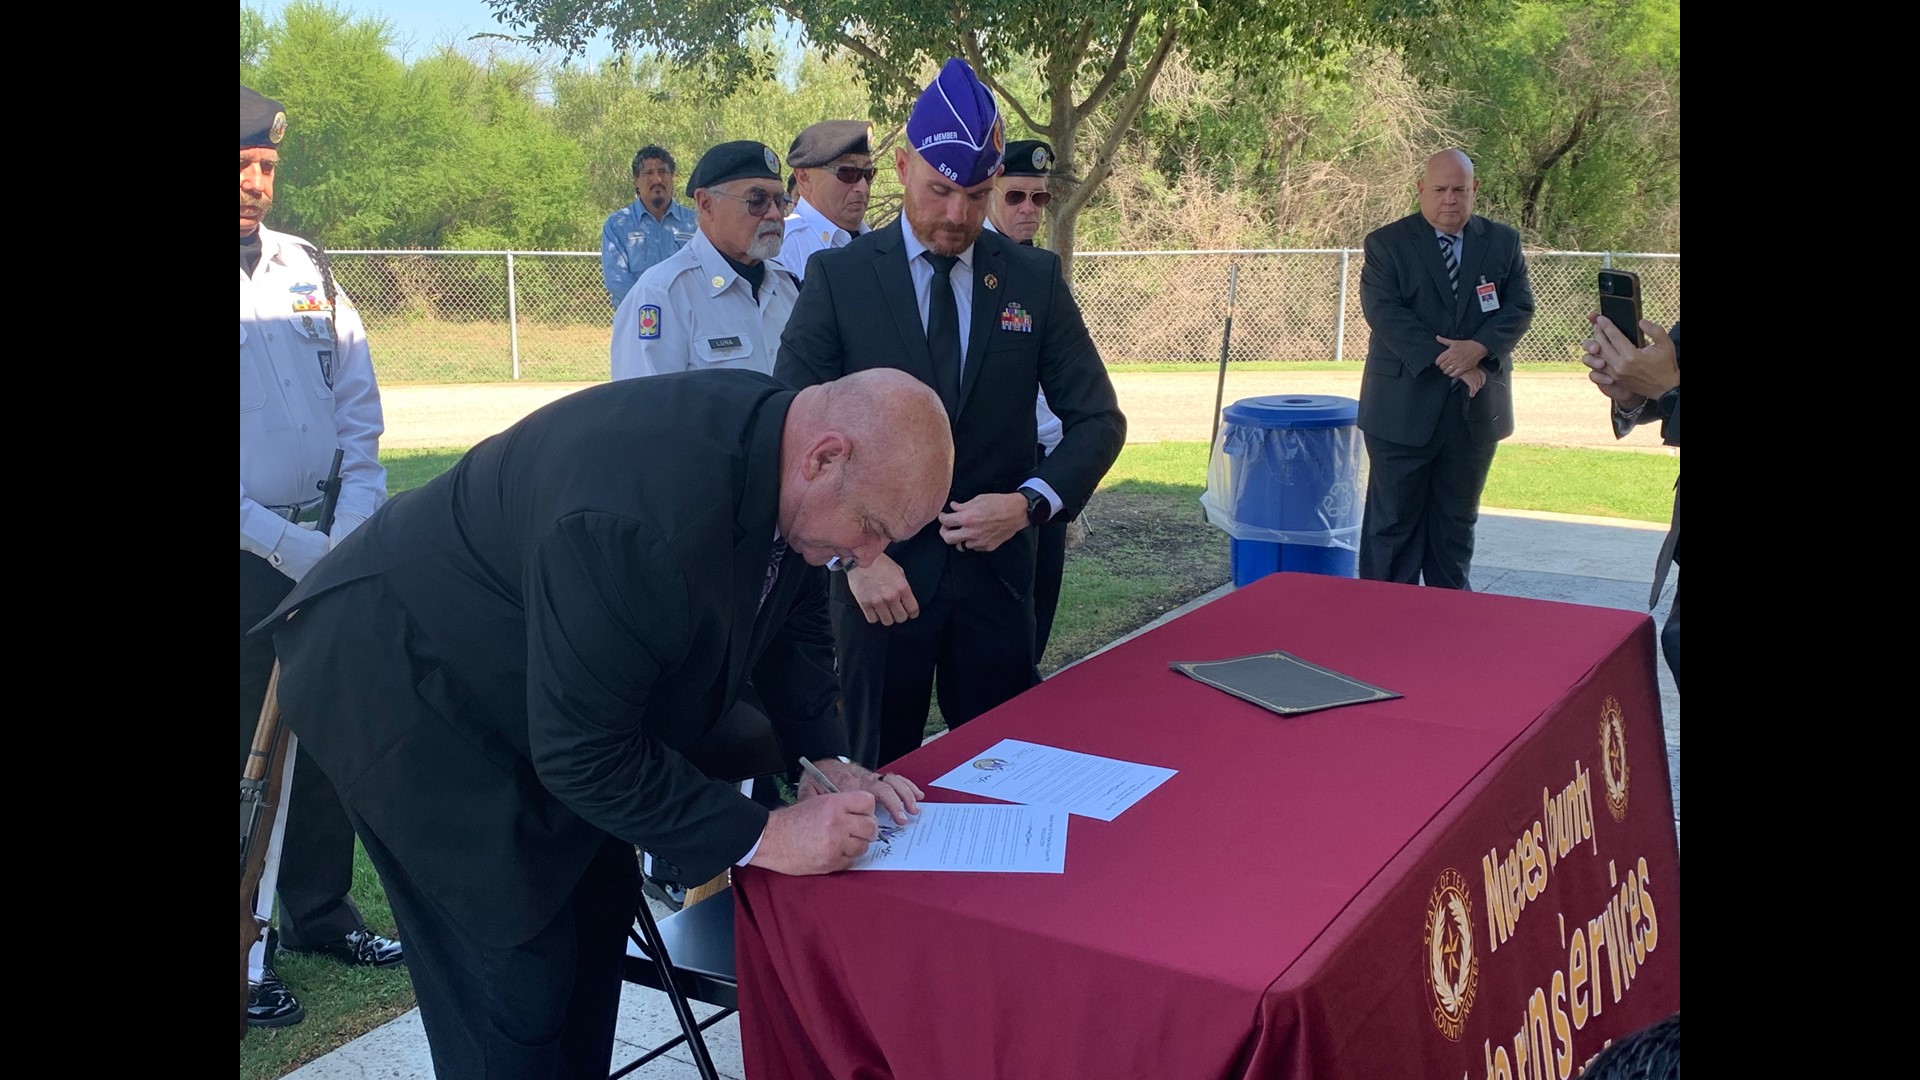 The Military Order of the Purple Heart and the Texas Land Office made the designation official on Monday.